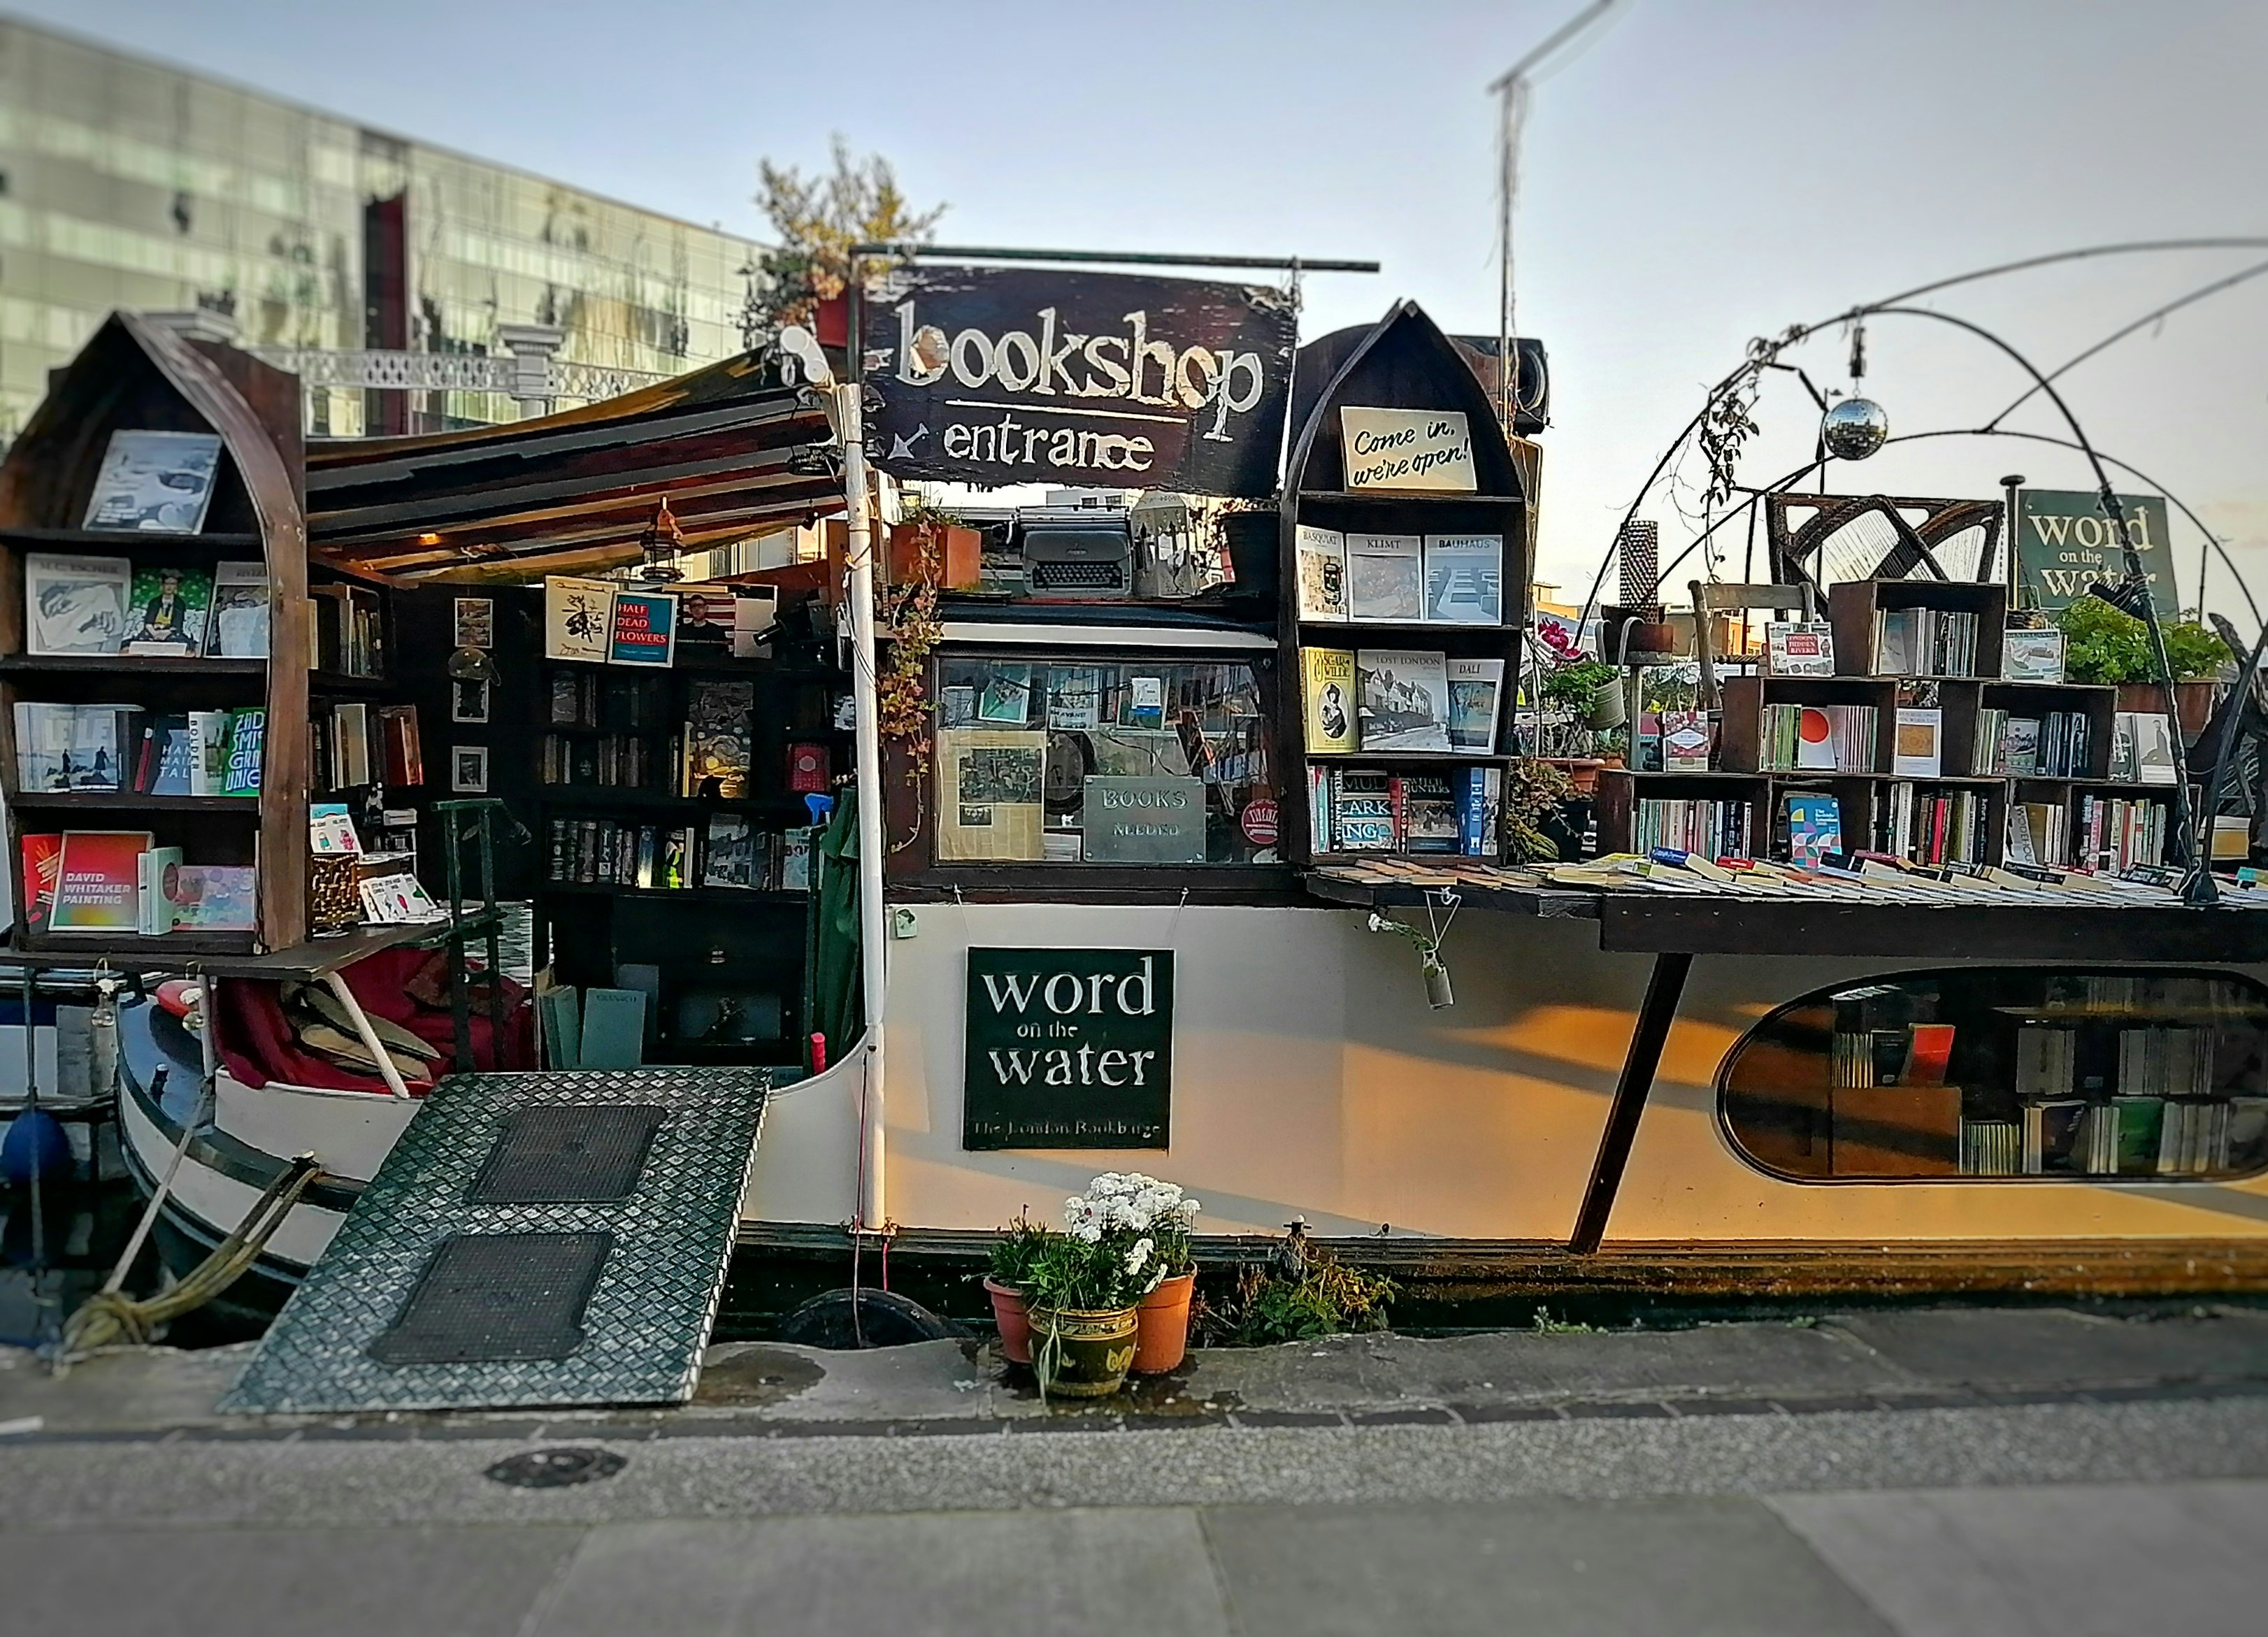 A barge docked by the side of the river. The sides of the barge are covered in shelves that are packed with books. A sign says 'Bookshop entrance' with an arrow pointing to the door